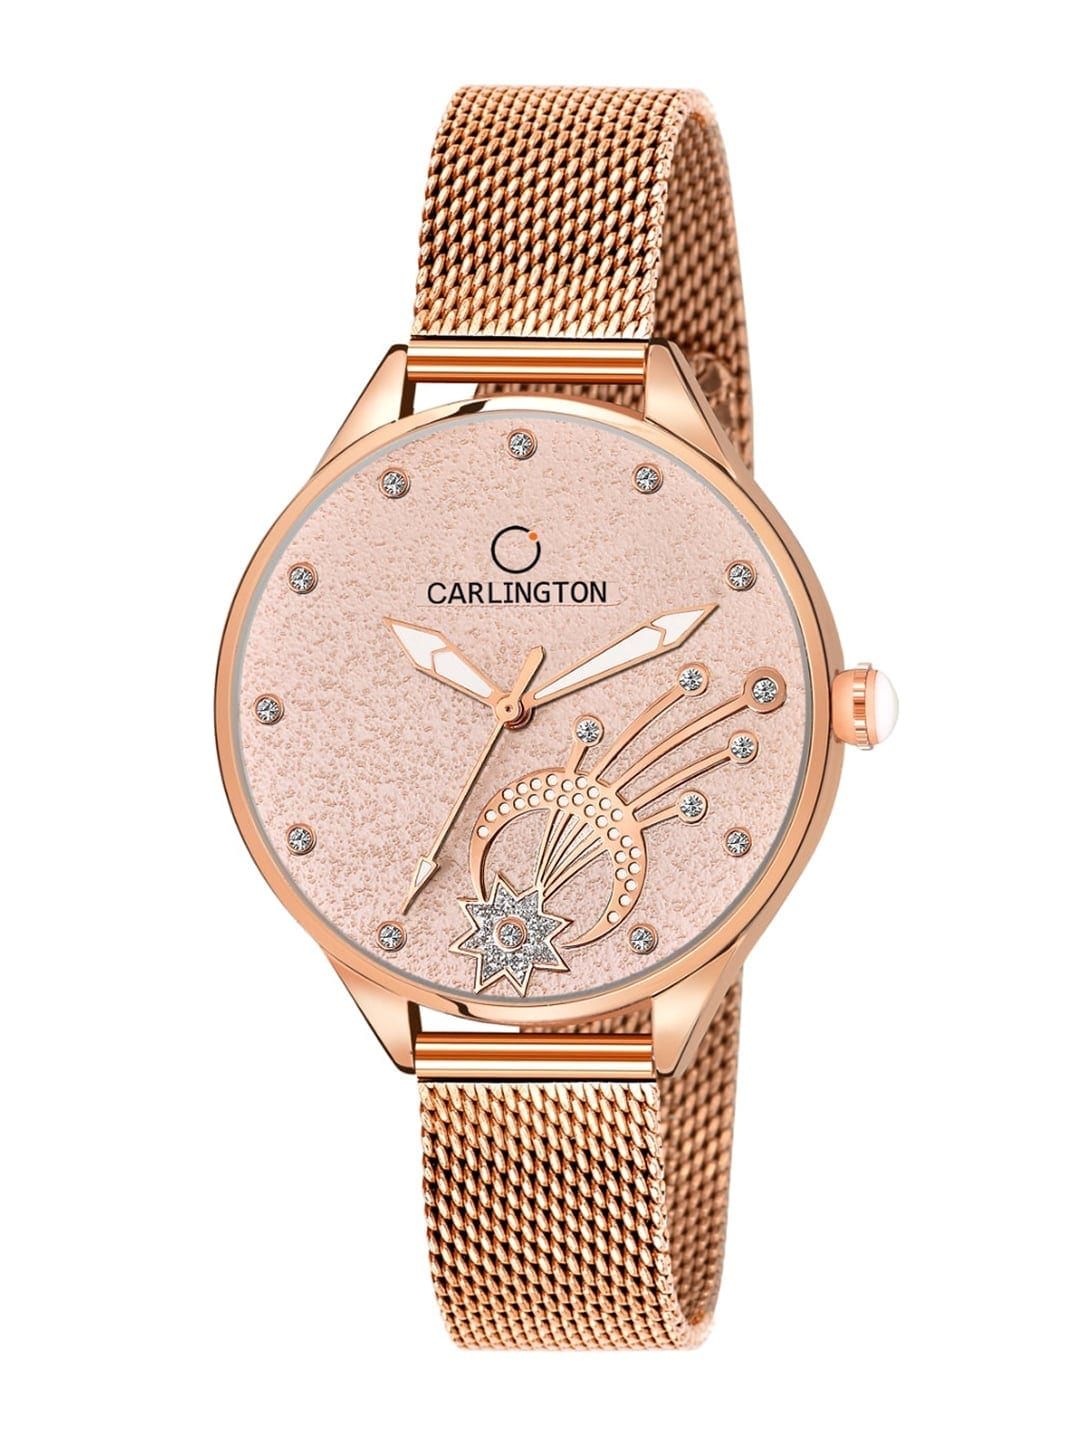 CARLINGTON Women Rose Gold-Toned Bracelet Style Analogue Watch Carlington CT2020 RoseGold Price in India